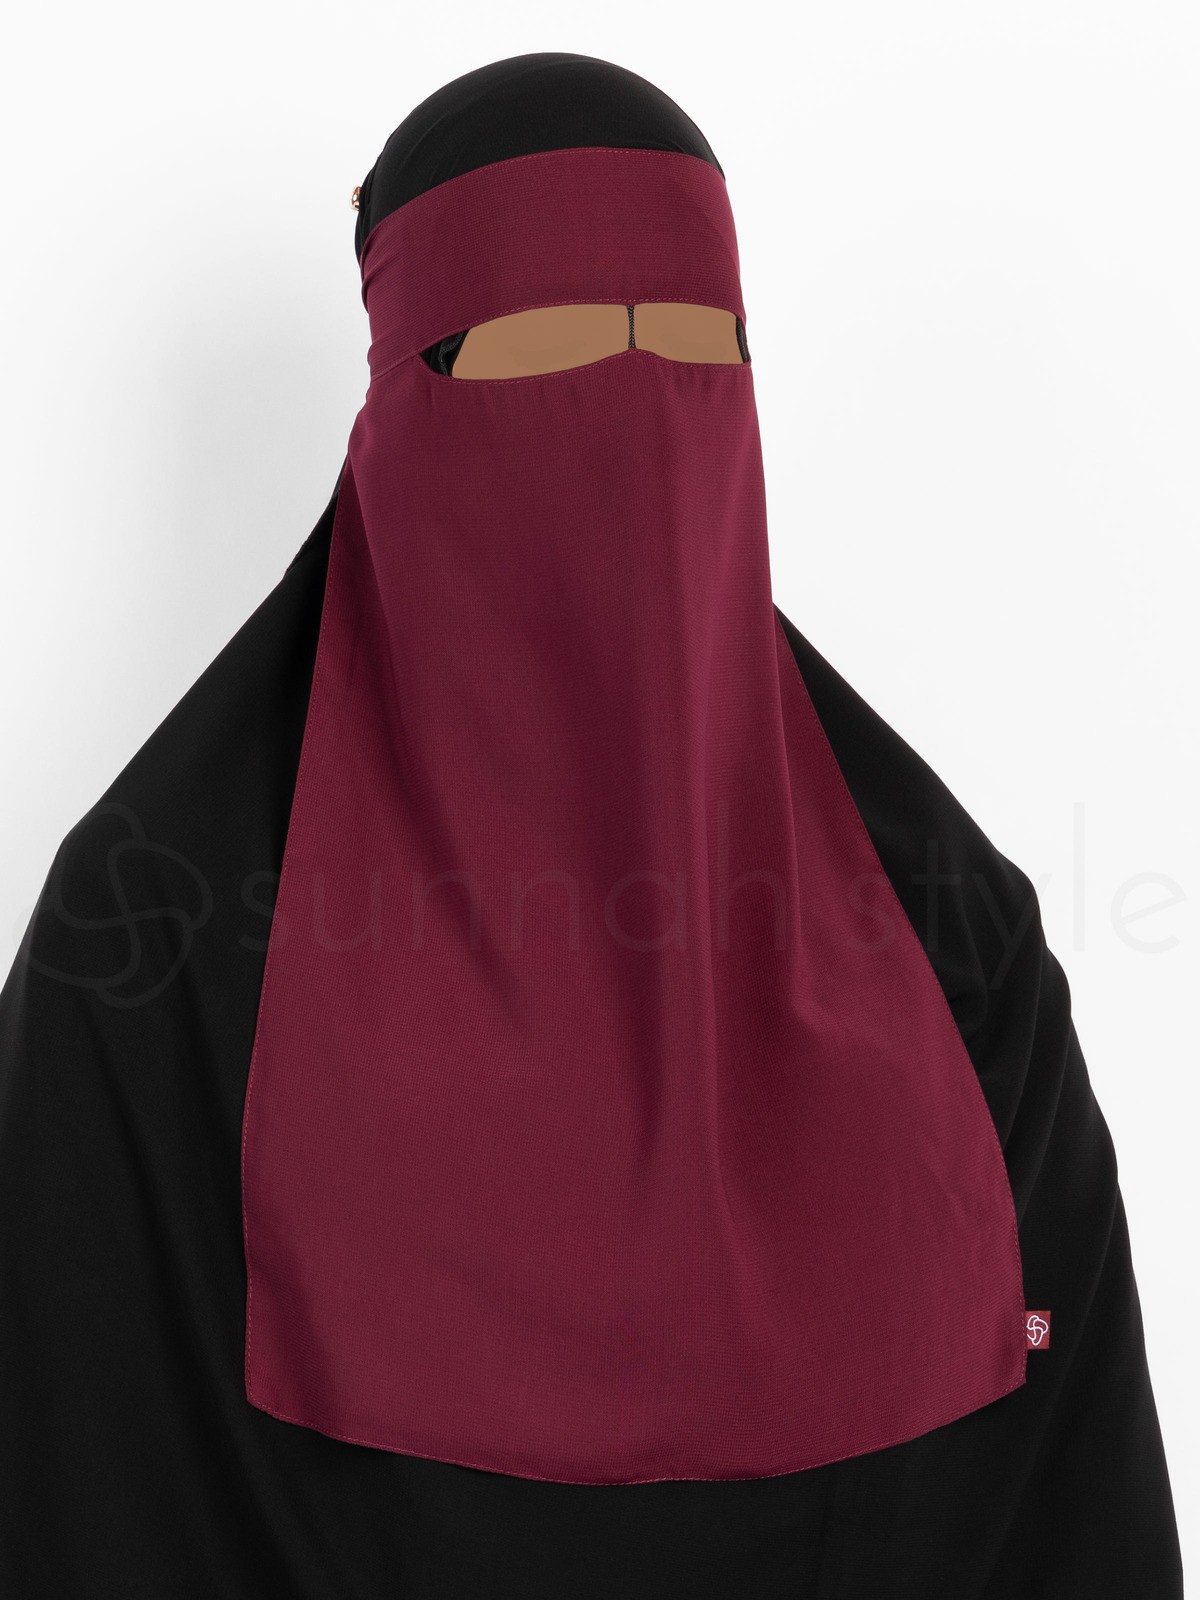 Sunnah Style - One Layer Niqab /w Nose String (Burgundy)